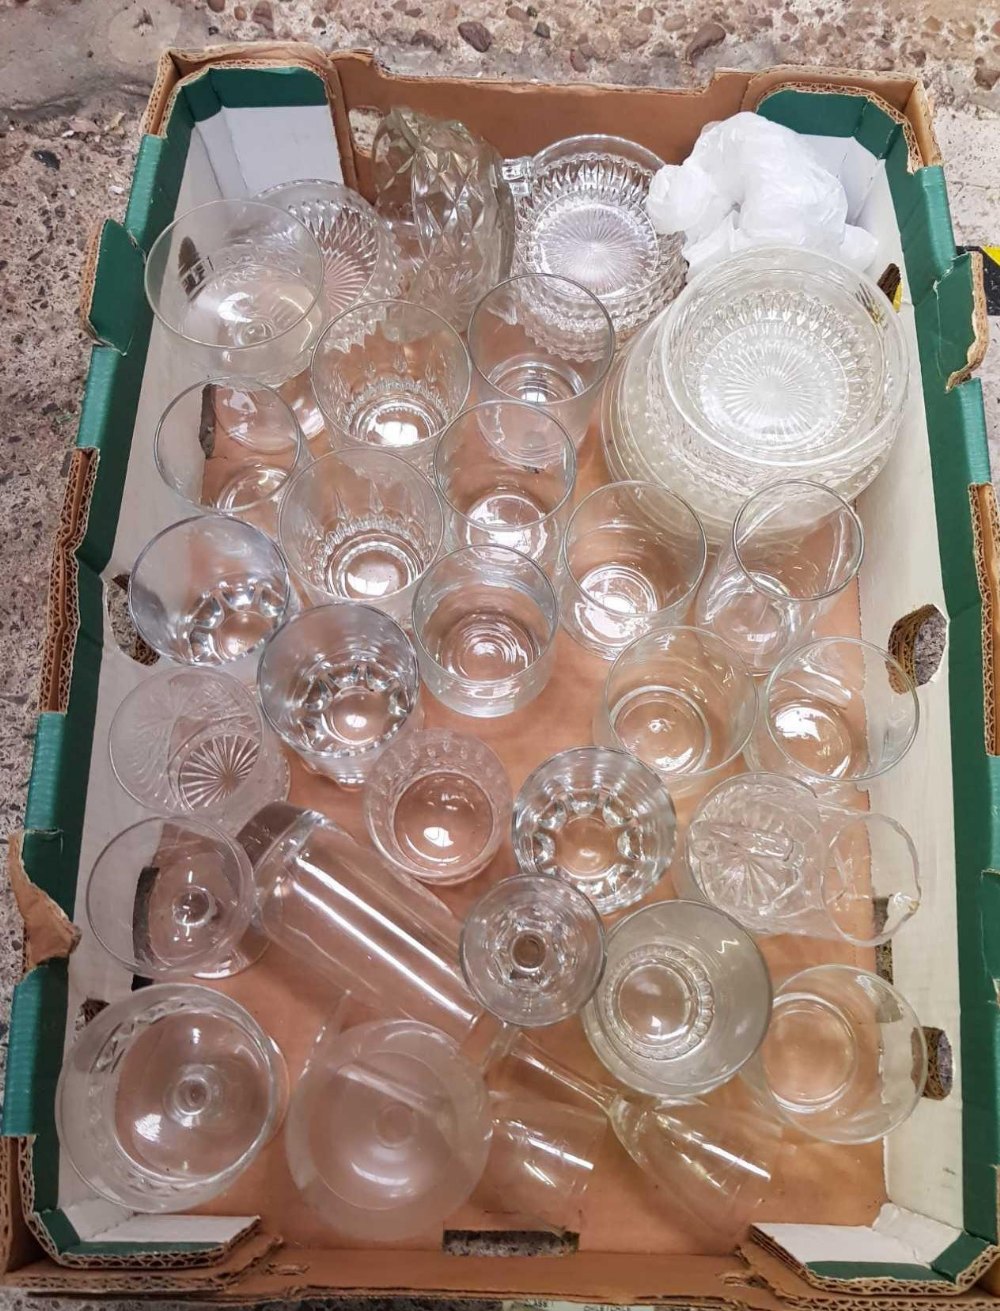 TWO CARTONS OF MIXED GLASS WARE